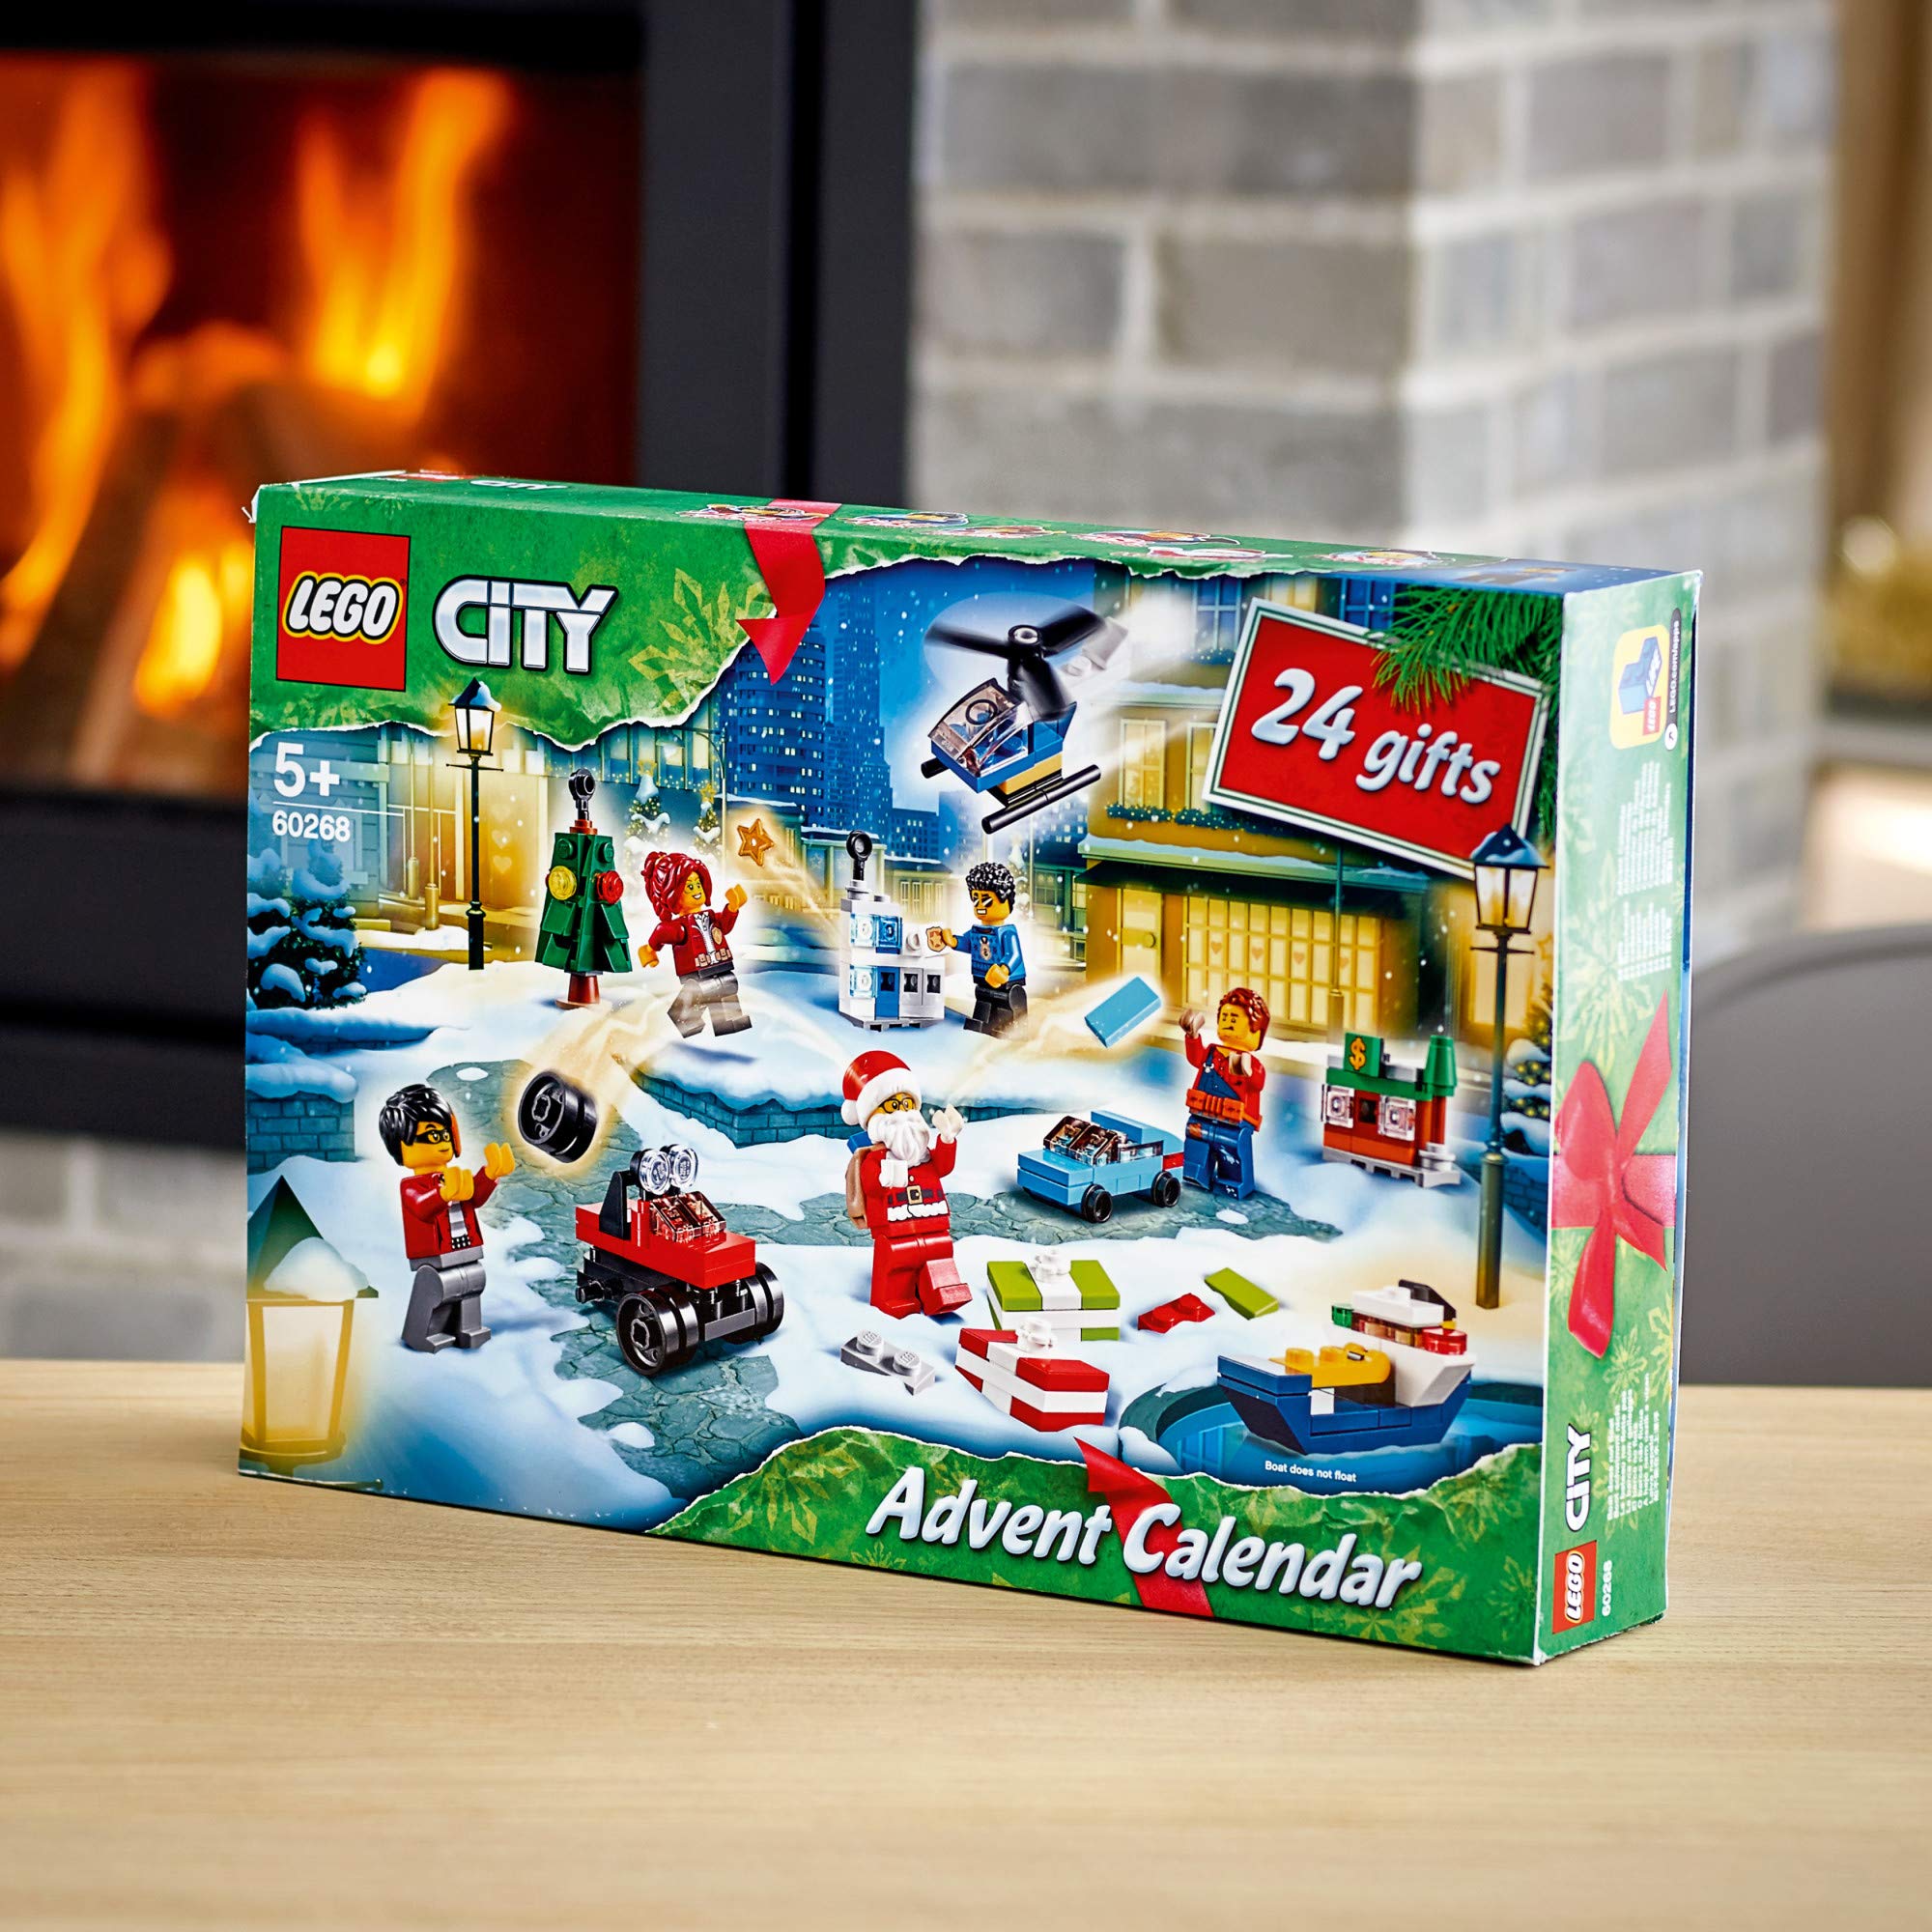 LEGO City 2020 Advent Calendar 60268 Playset, Includes 6 City Adventures TV Series Characters, Miniature Builds, City Play Mat, and Many More Fun and Festive Features (342 Pieces)